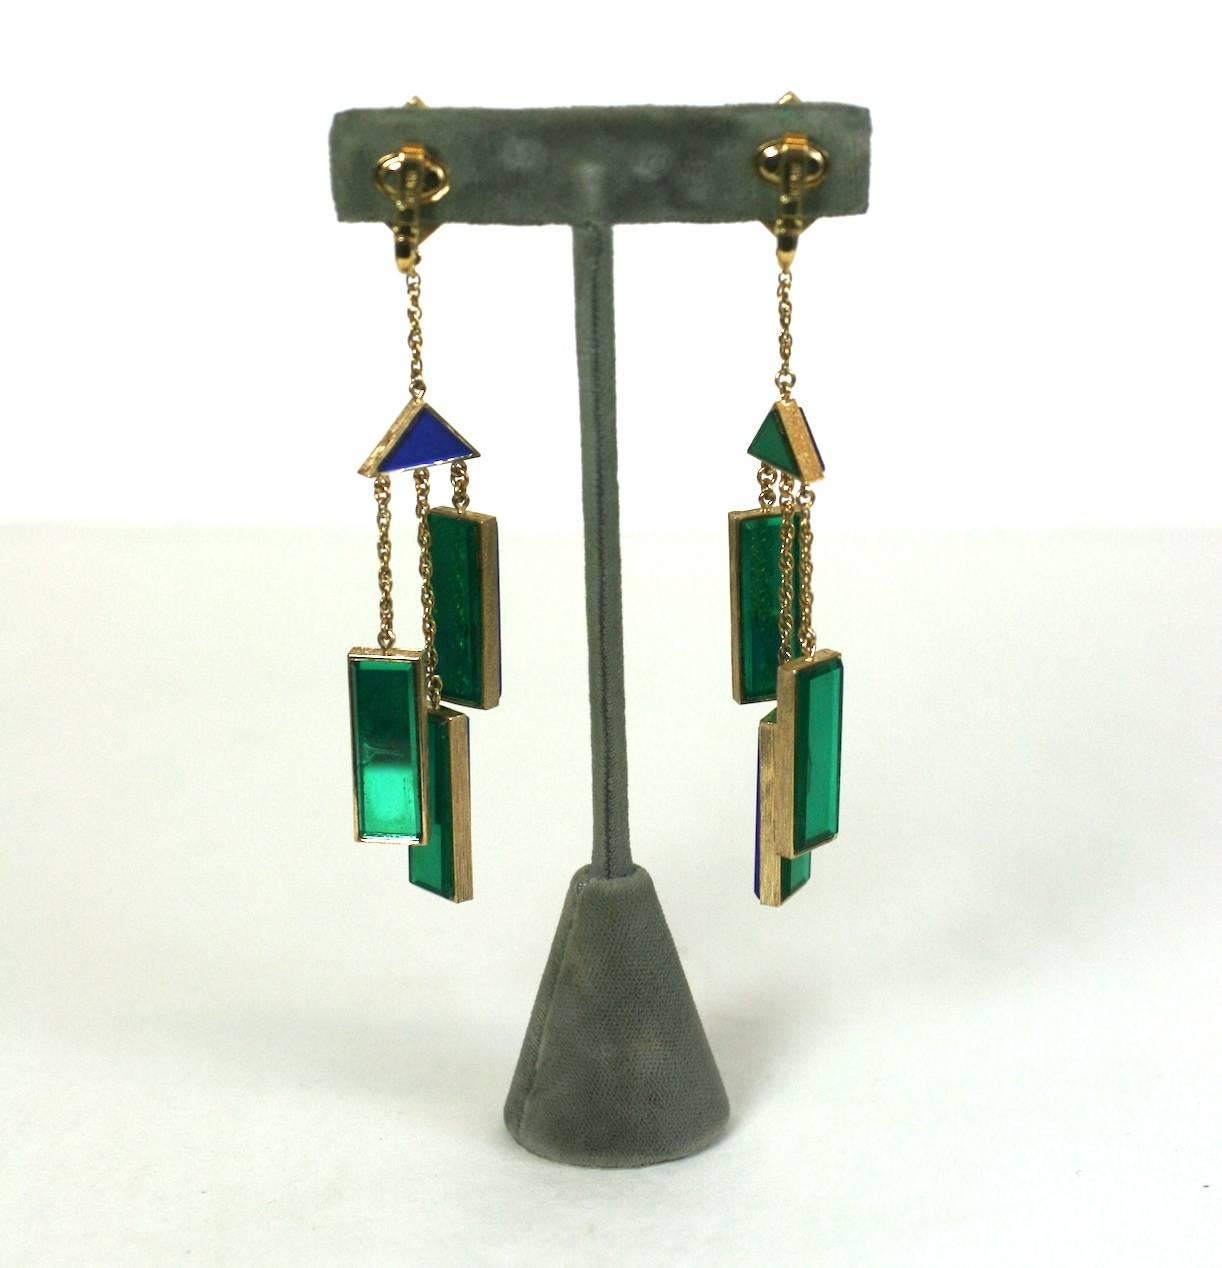 Trifari Mirror Tile Mod Mobile Earrings In Excellent Condition For Sale In New York, NY